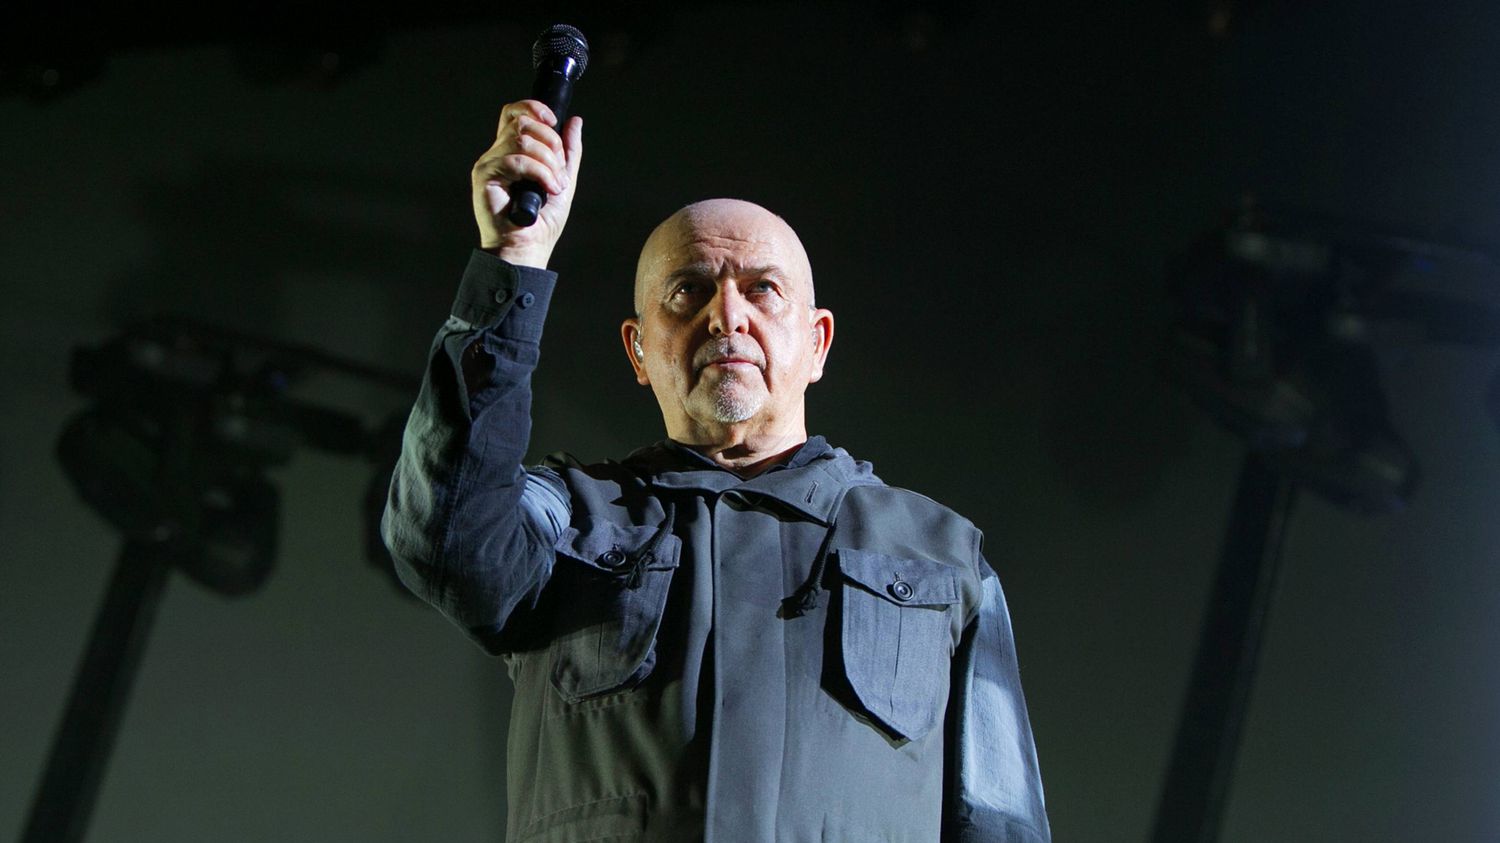 Peter Gabriel Reveals New Song “This Is Home”